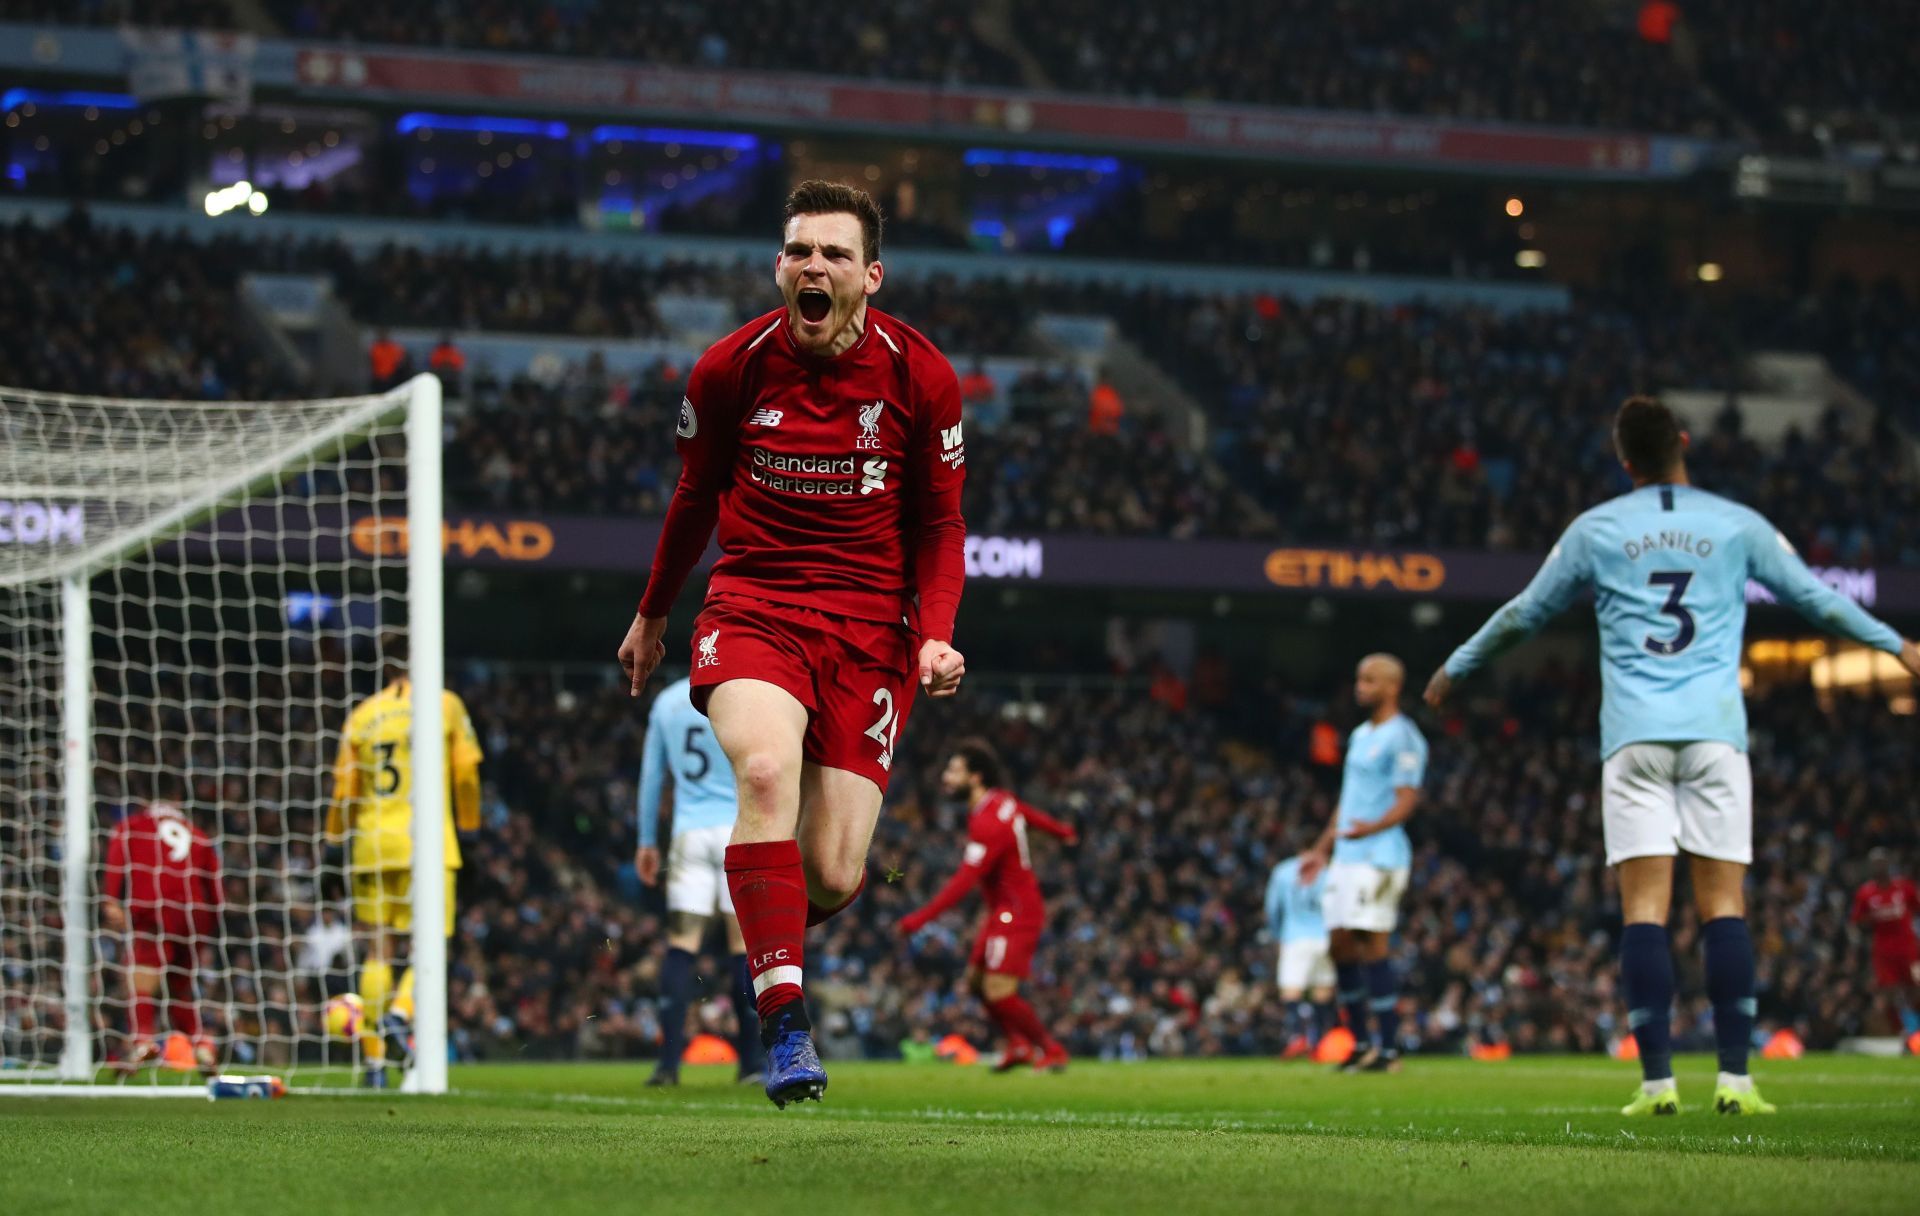 Andrew Robertson has been another stellar performer for Liverpool